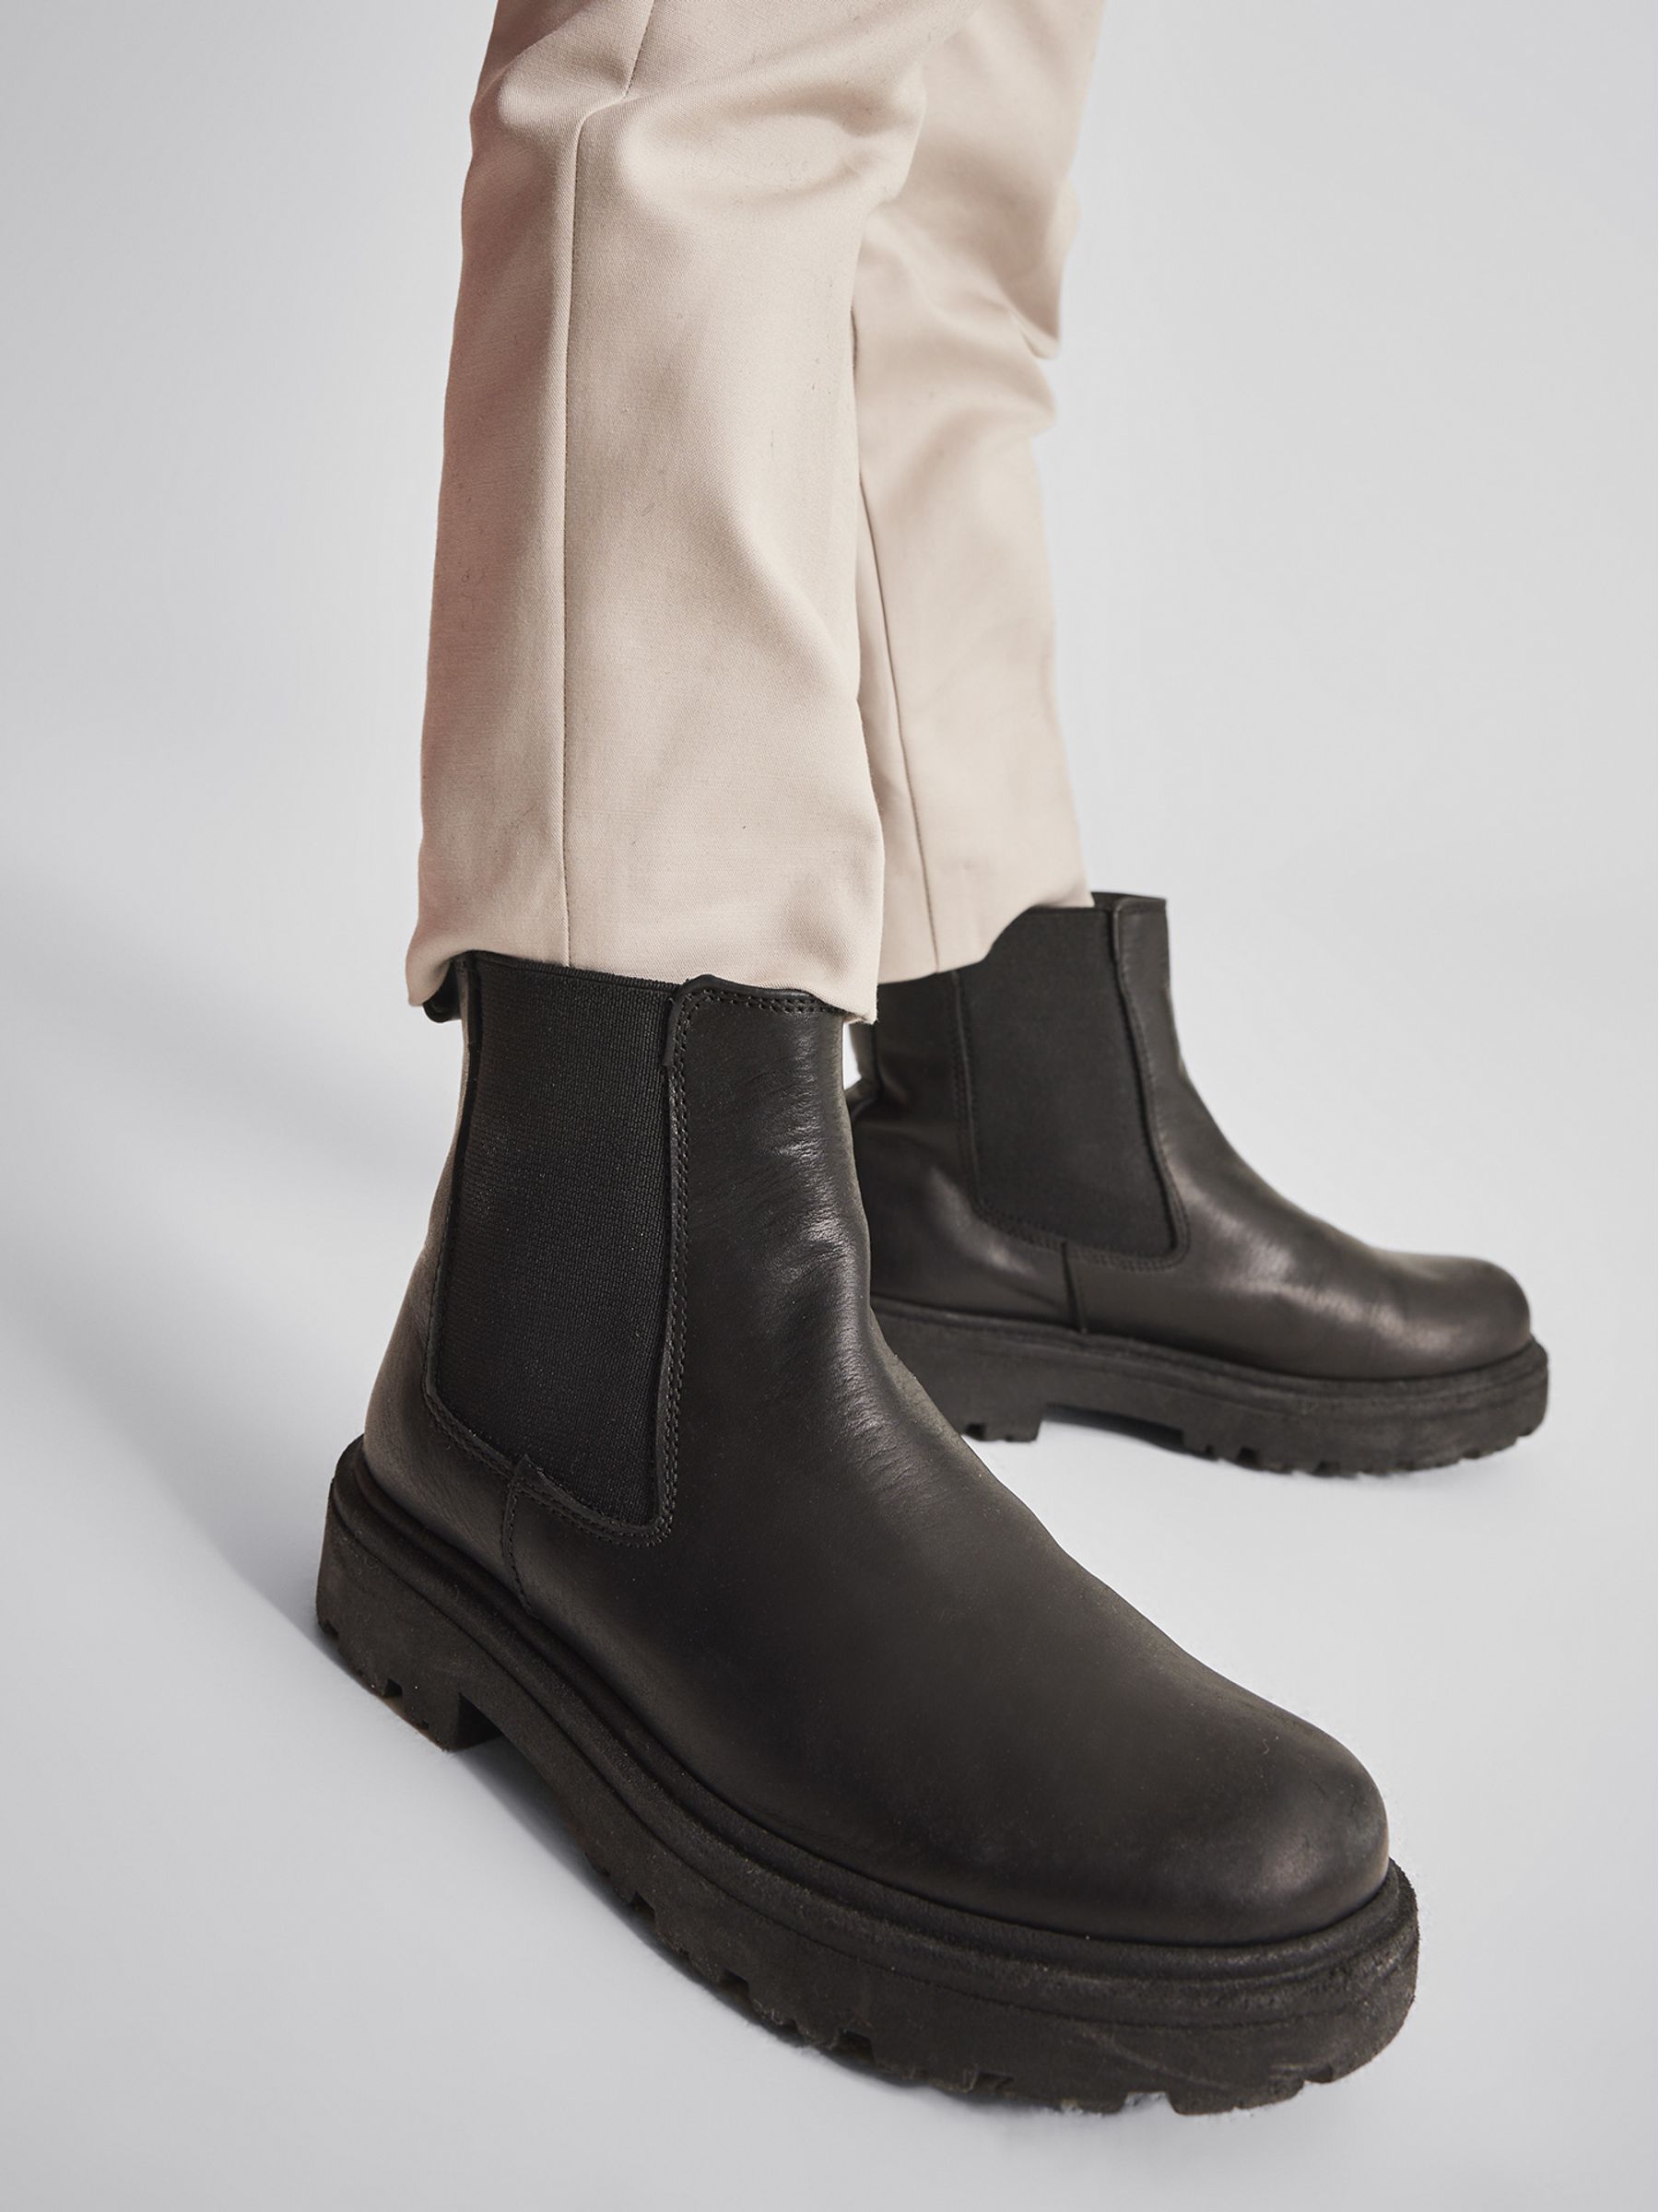 Reiss Taylor Junior Leather Chelsea Boots - REISS